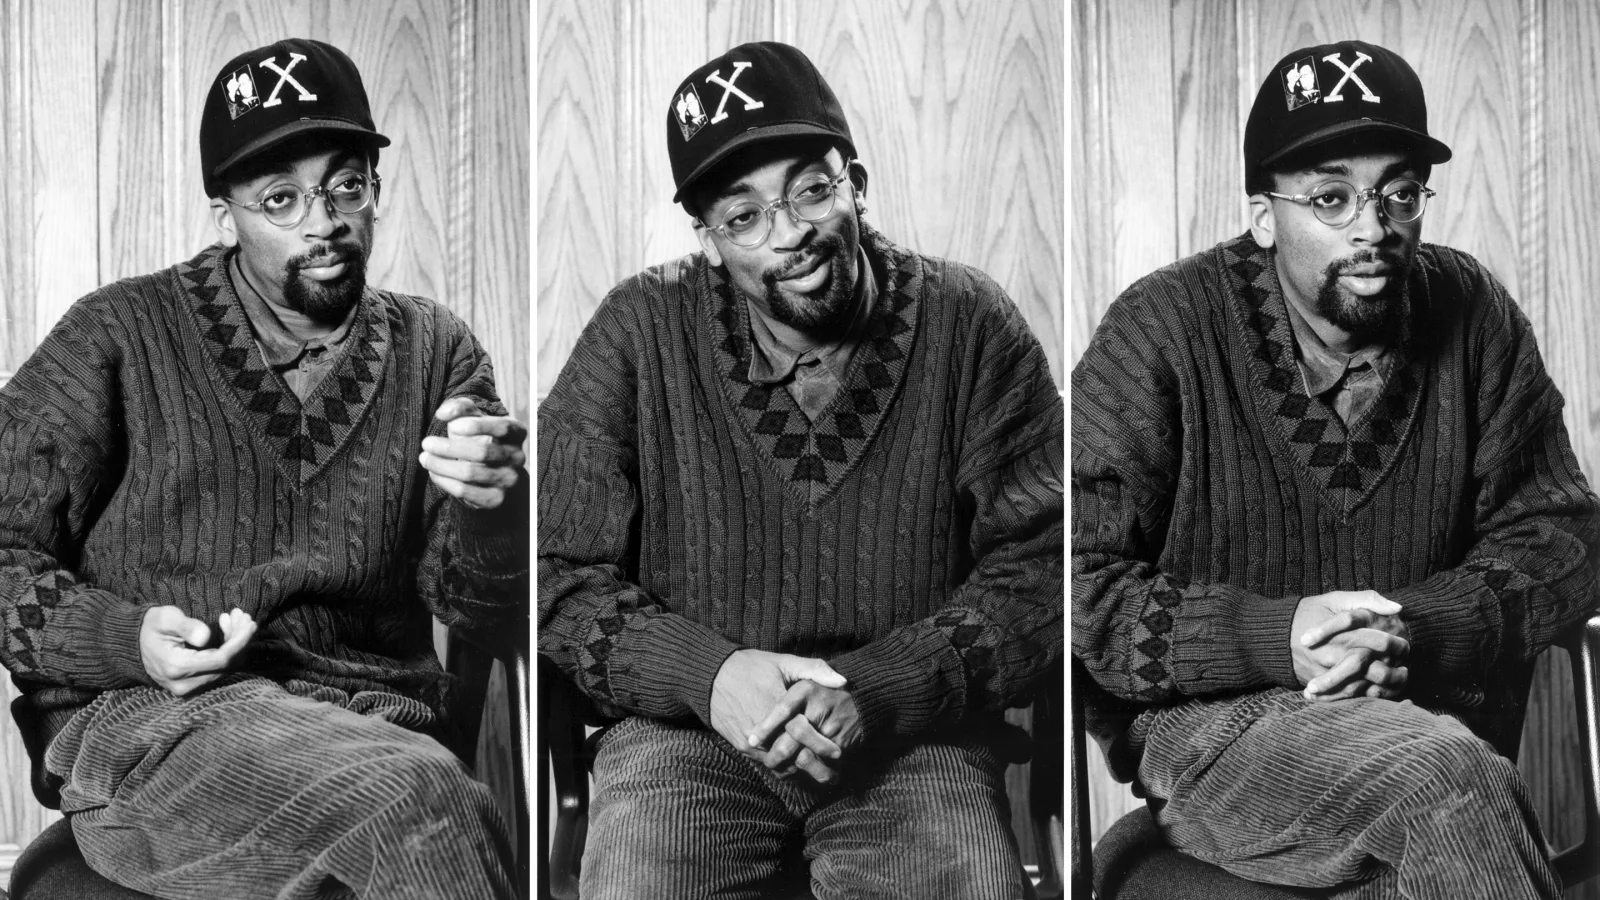 Phil Jackson refers to Spike Lee as fan who doesn't know anything